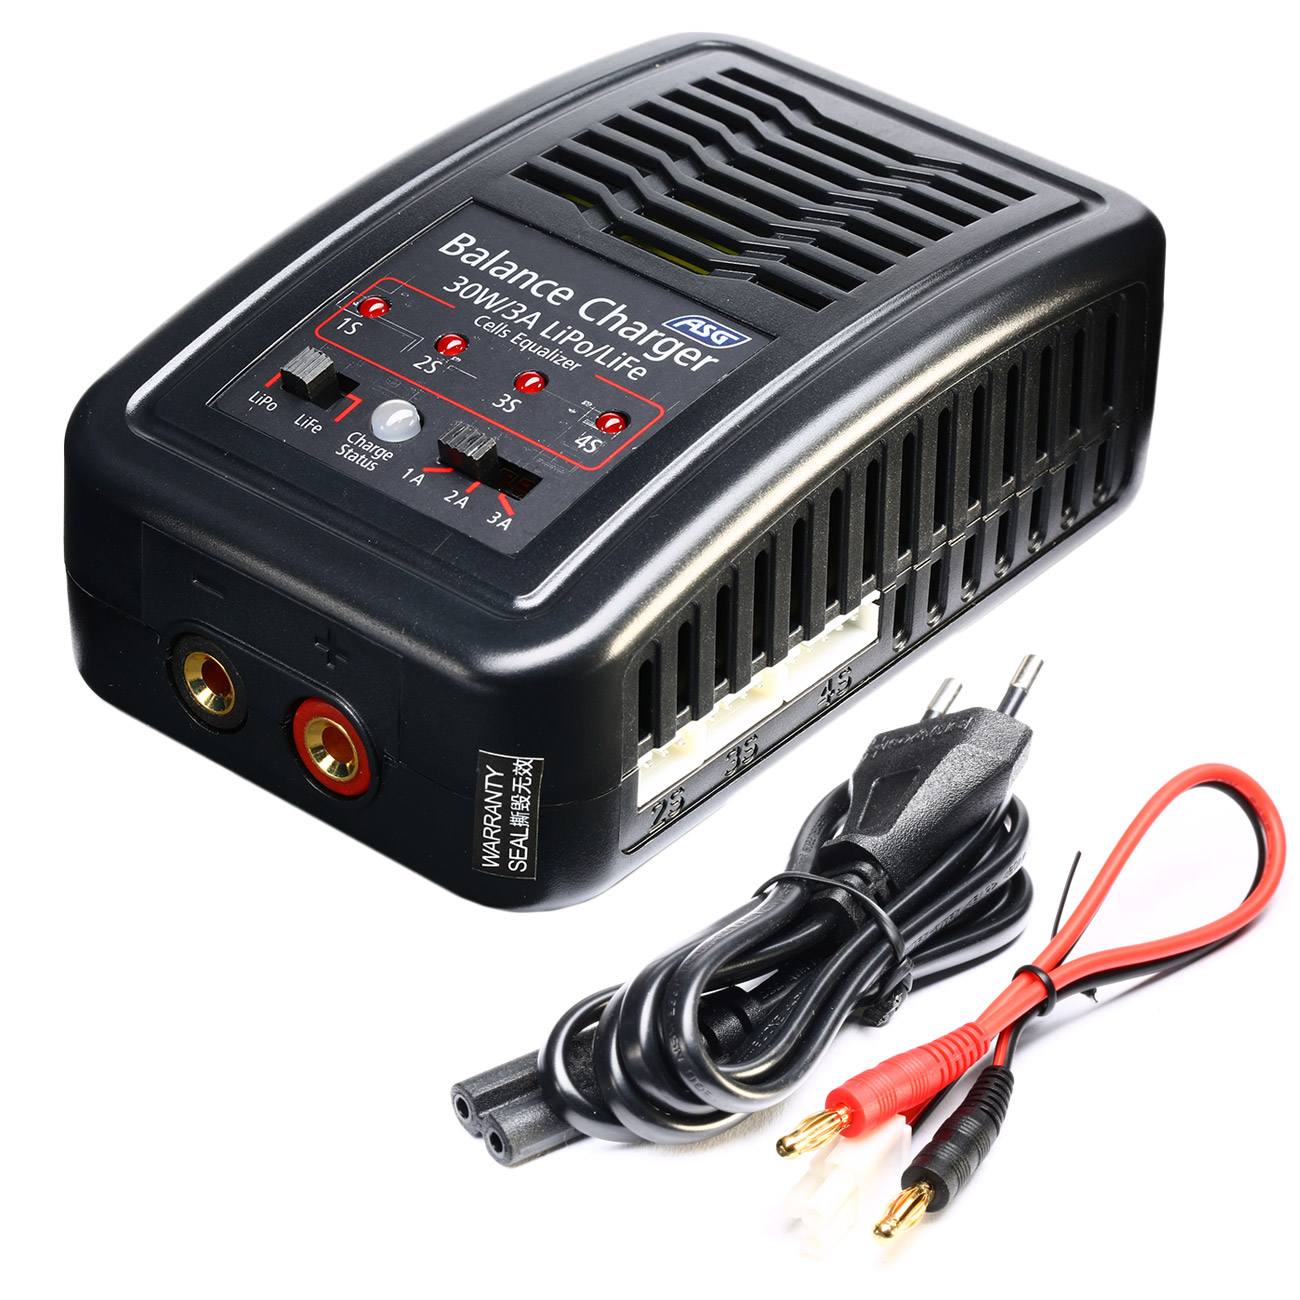 ASG Auto-Stop Charger Ladegerät f. LiPo / LiFe 2-4S 1-3A 30W 230V kaufen